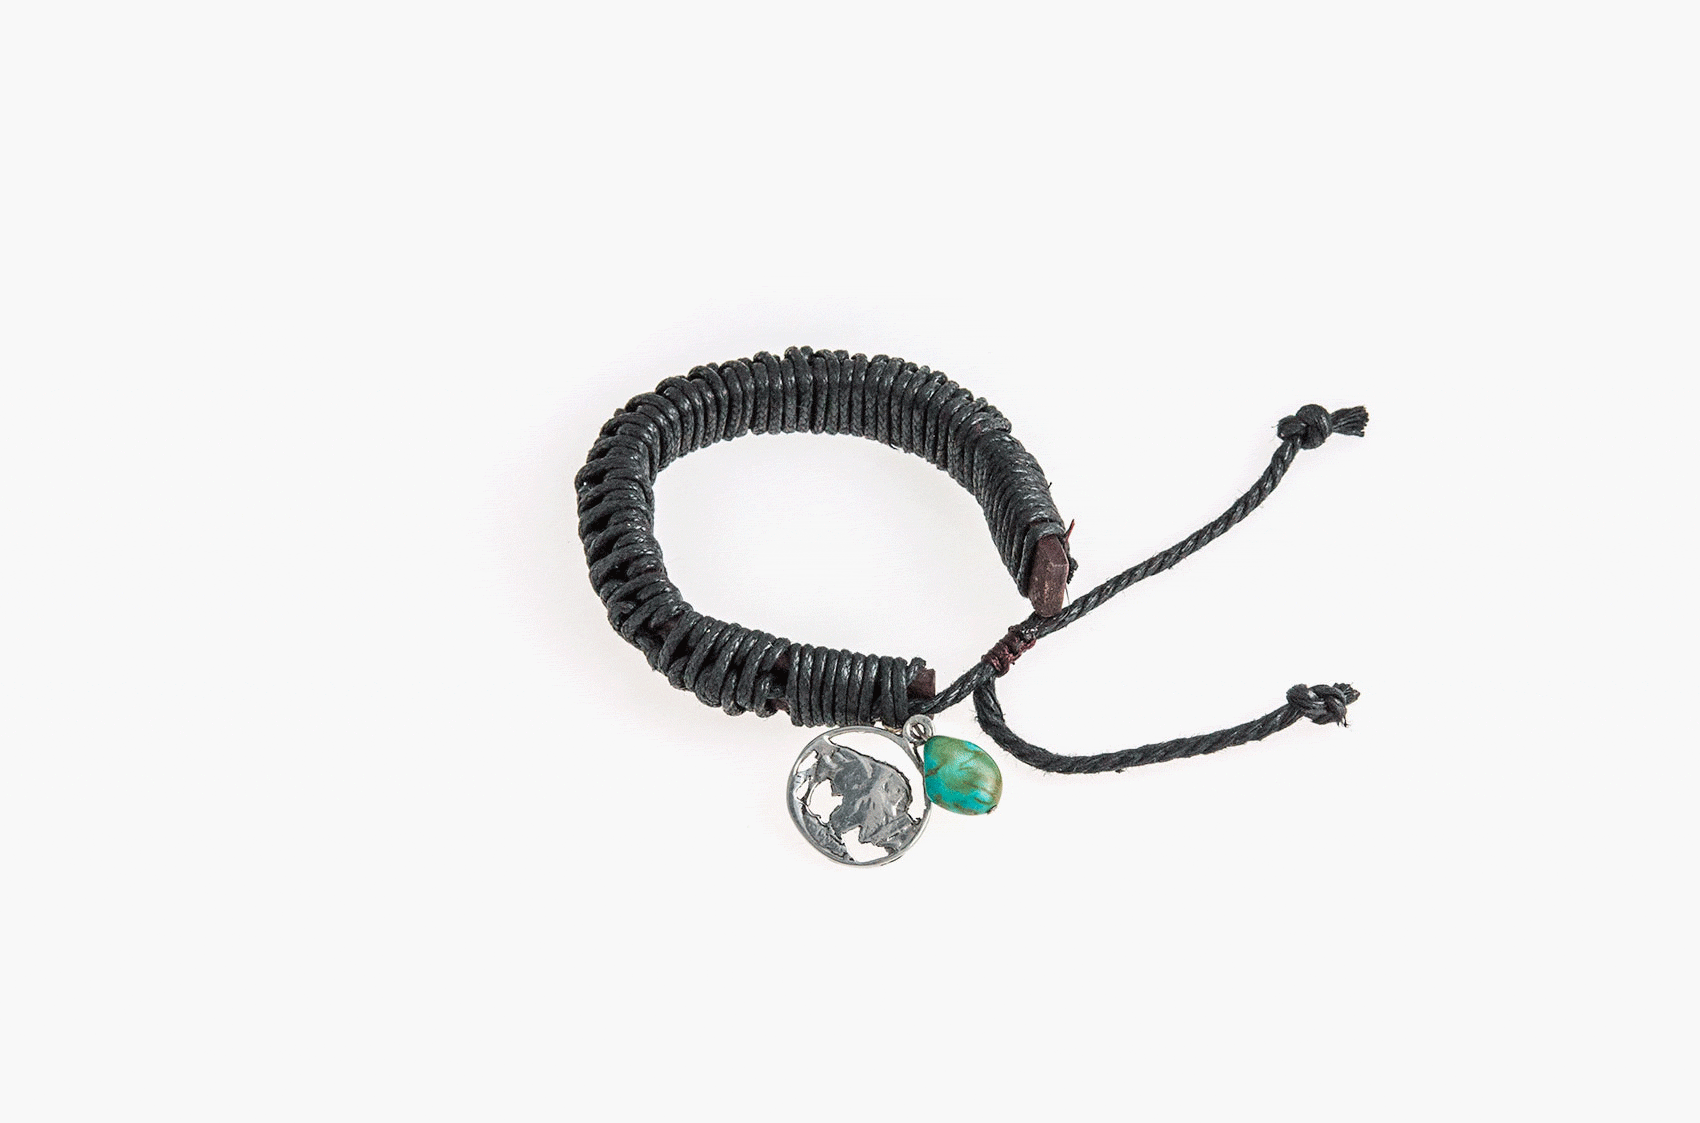 Leather and cord bracelet with turquoise